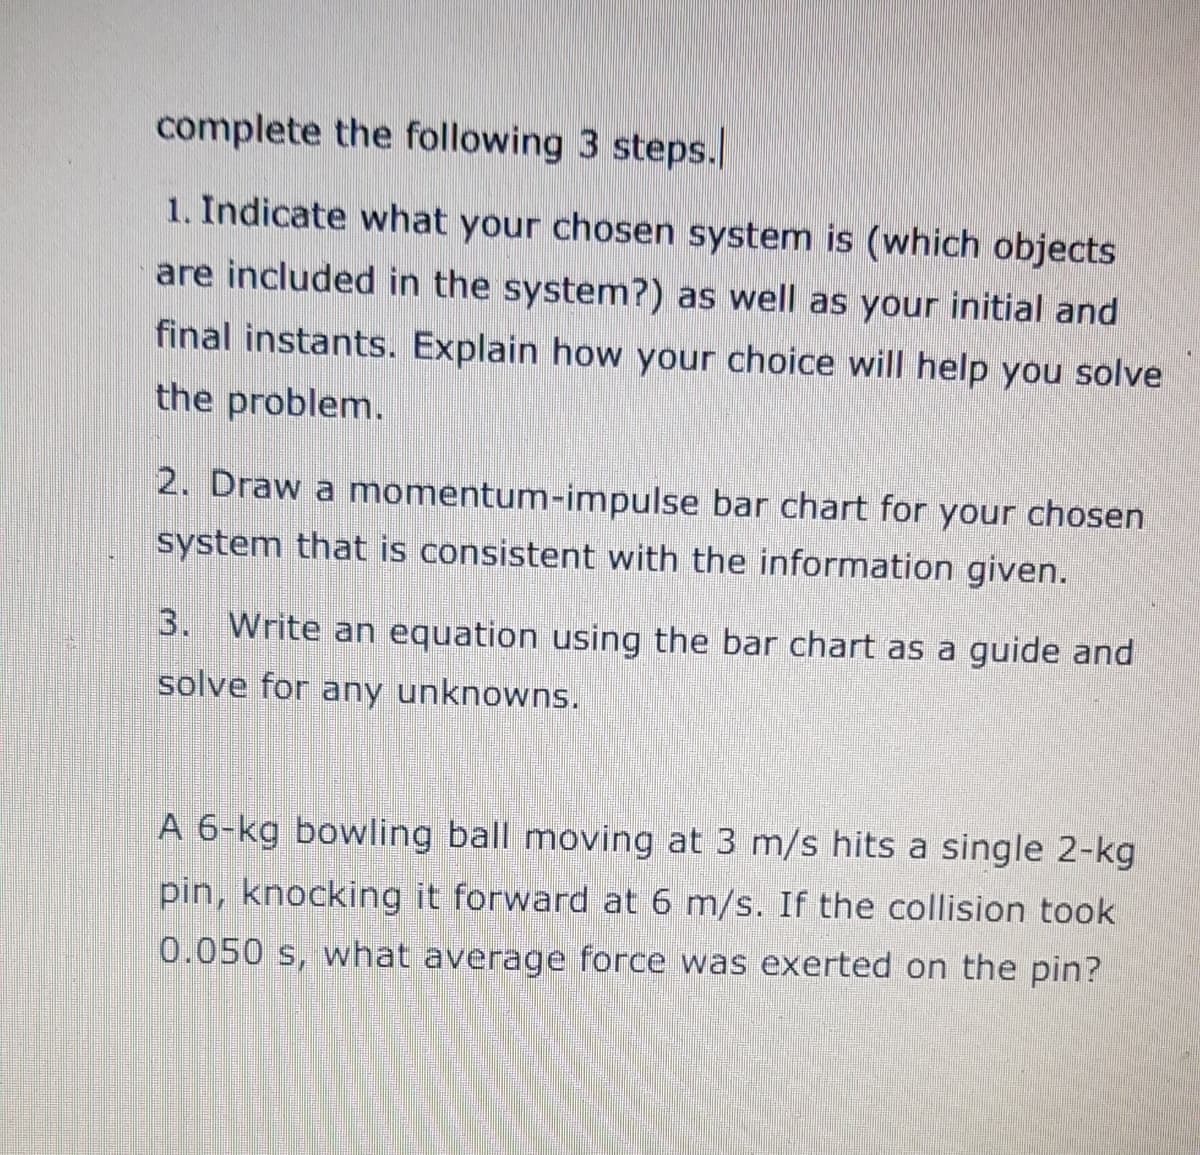 complete the following 3 steps.
1. Indicate what your chosen system is (which objects
are included in the system?) as well as your initial and
final instants. Explain how your choice will help you solve
the problem.
2. Draw a momentum-impulse bar chart for your chosen
system that is consistent with the information given.
3. Write an equation using the bar chart as a guide and
solve for any unknowns.
A 6-kg bowling ball moving at 3 m/s hits a single 2-kg
pin, knocking it forward at 6 m/s. If the collision took
0.050 s, what average force was exerted on the pin?
